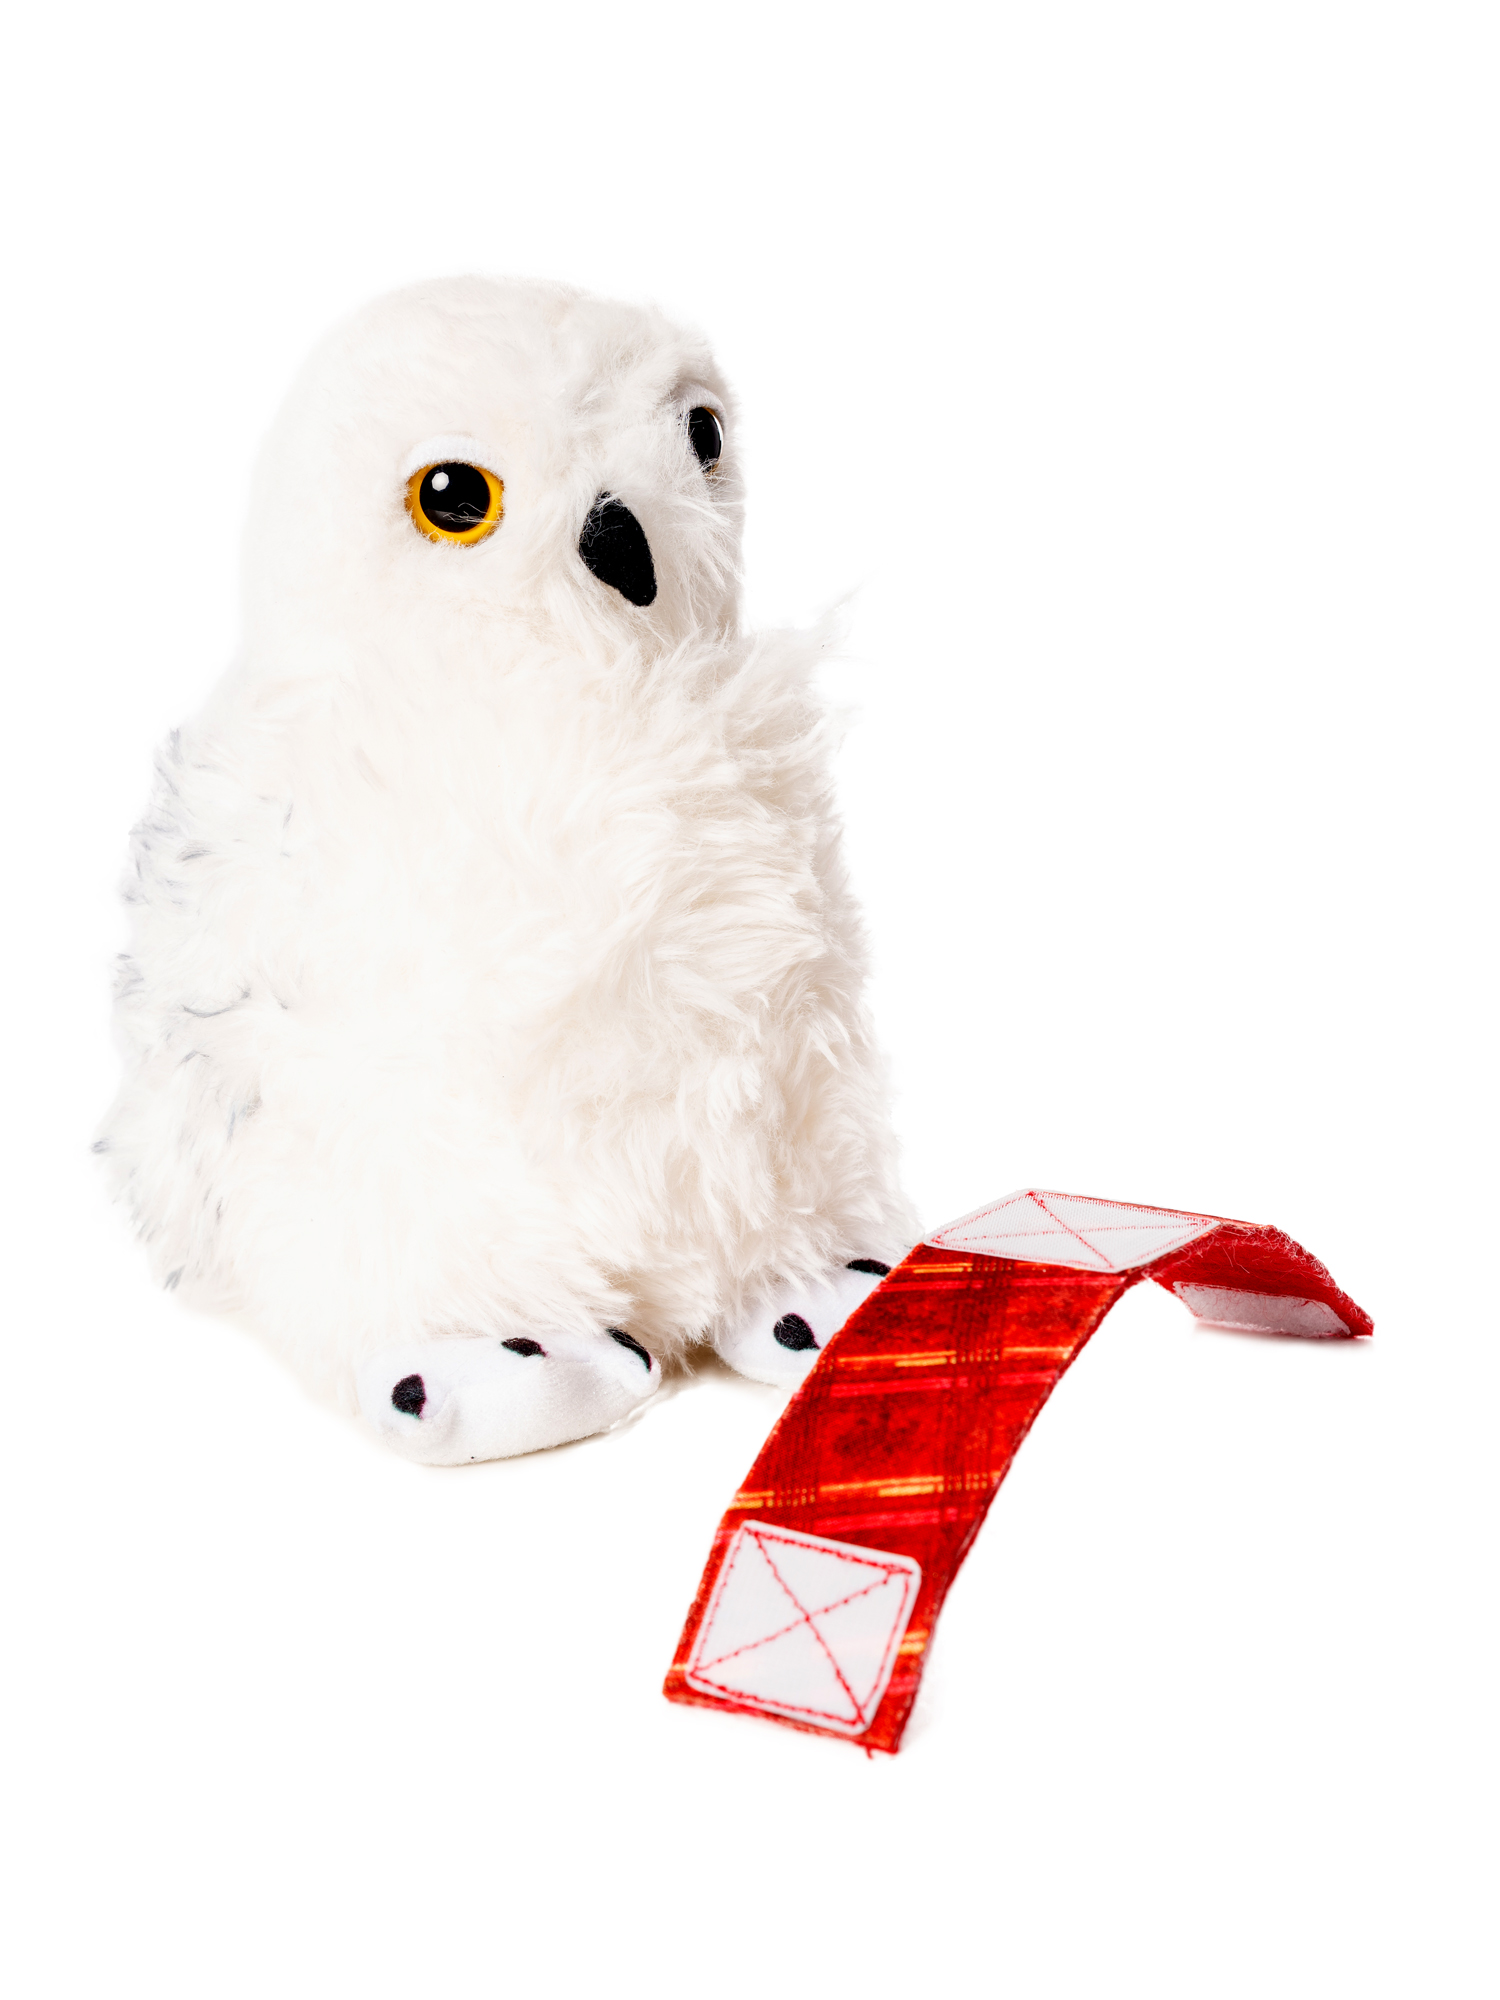 Owl Pinata (Hedwig from Harry Potter)